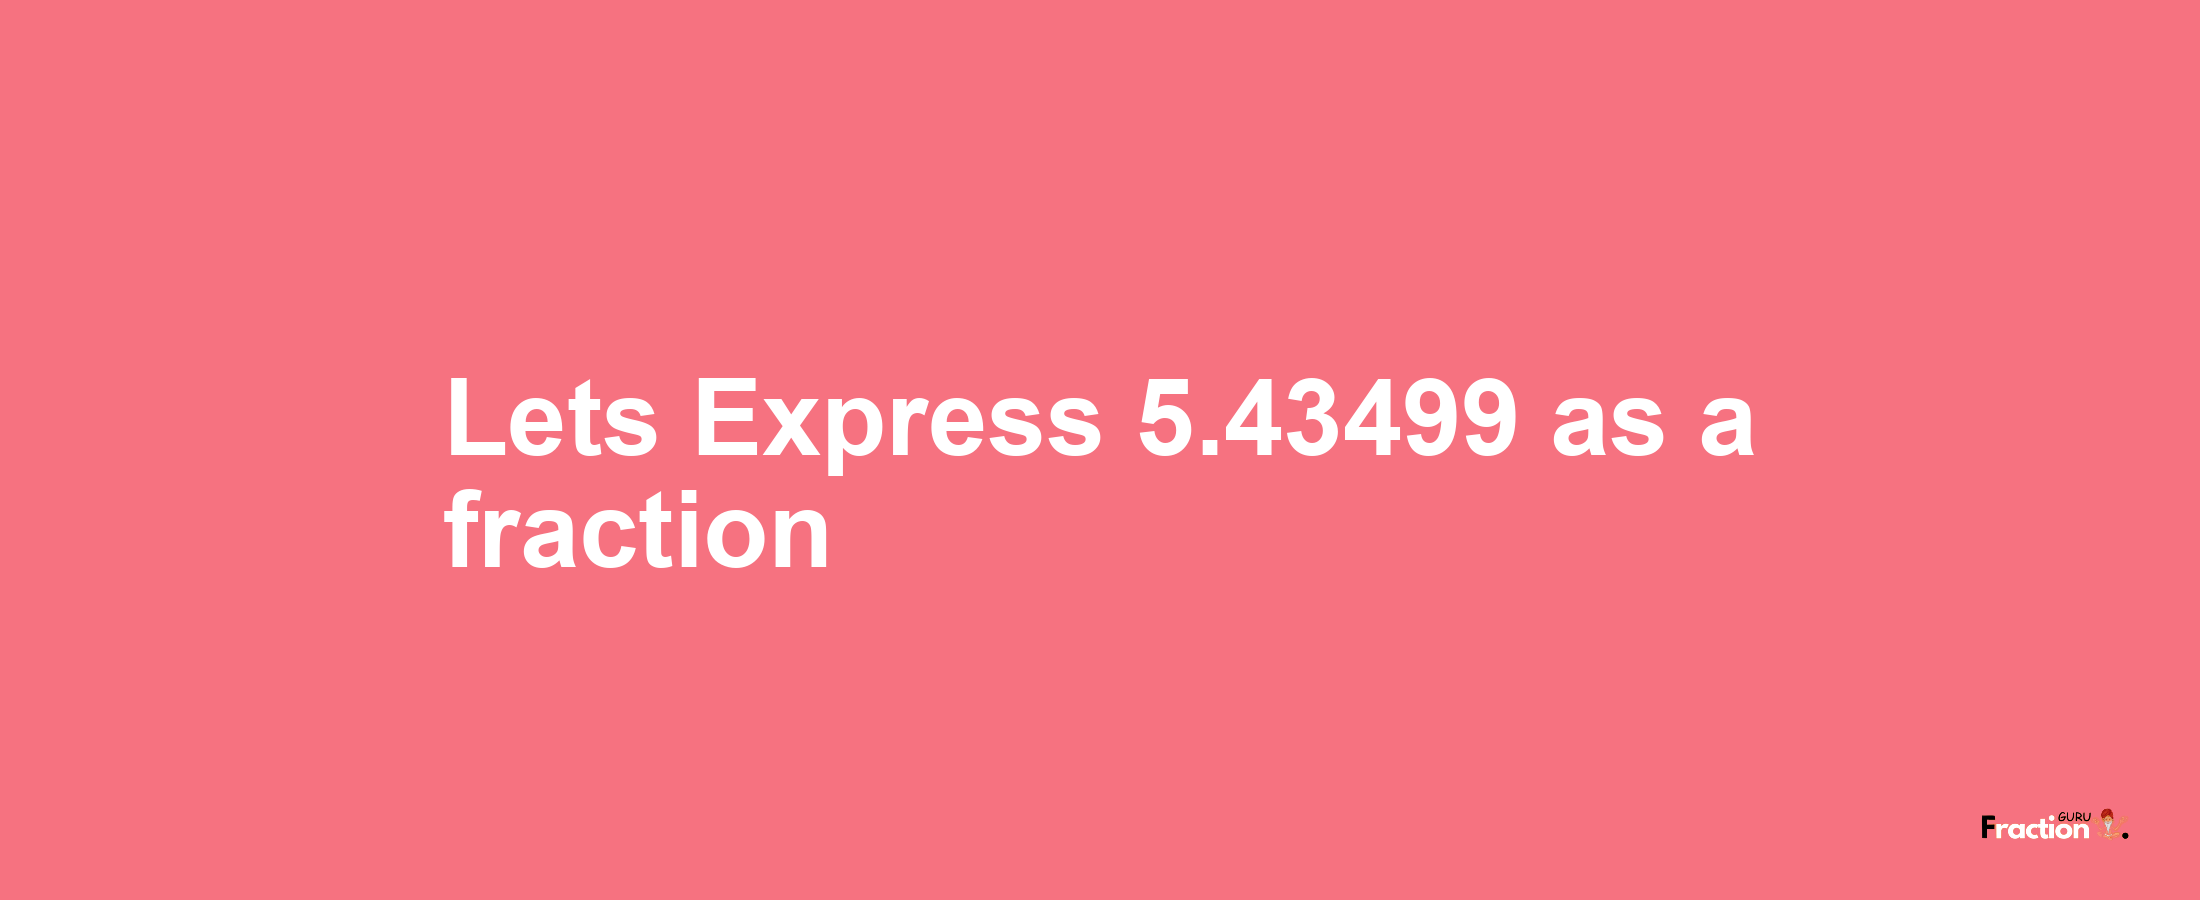 Lets Express 5.43499 as afraction